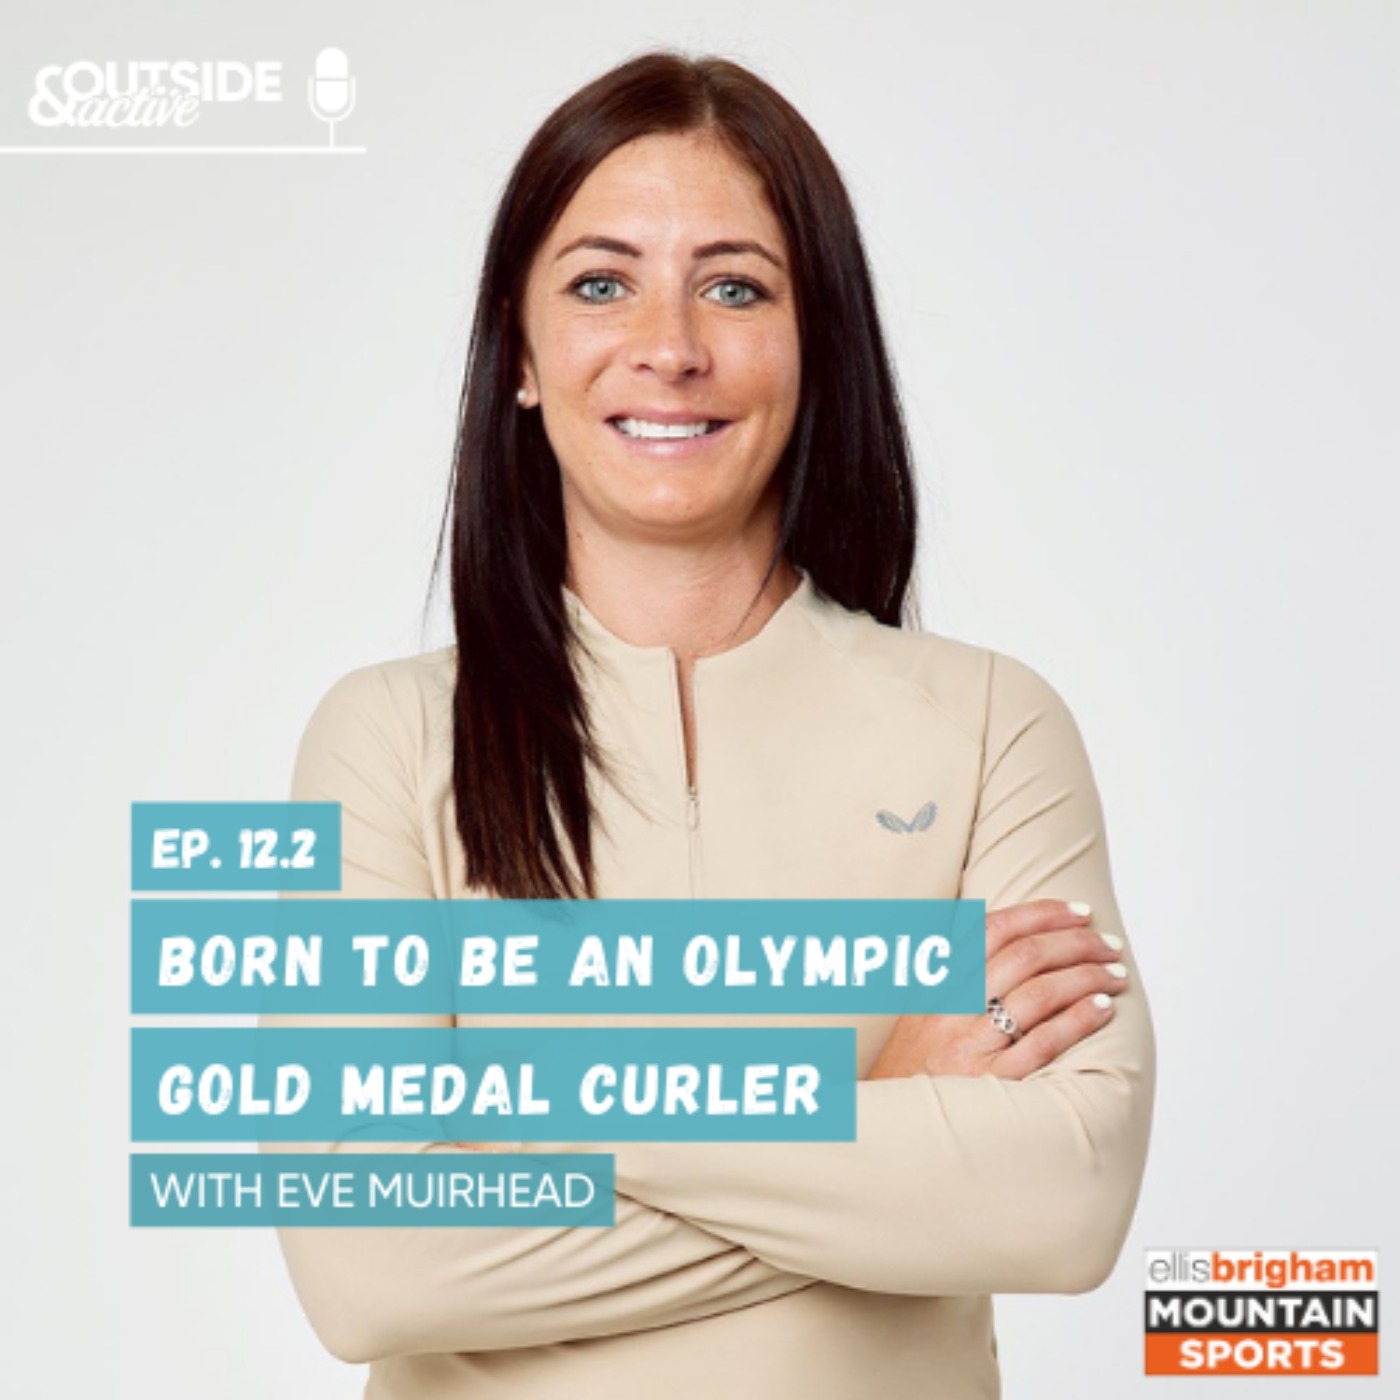 Eve Muirhead - Born to be an Olympic gold medal Curler